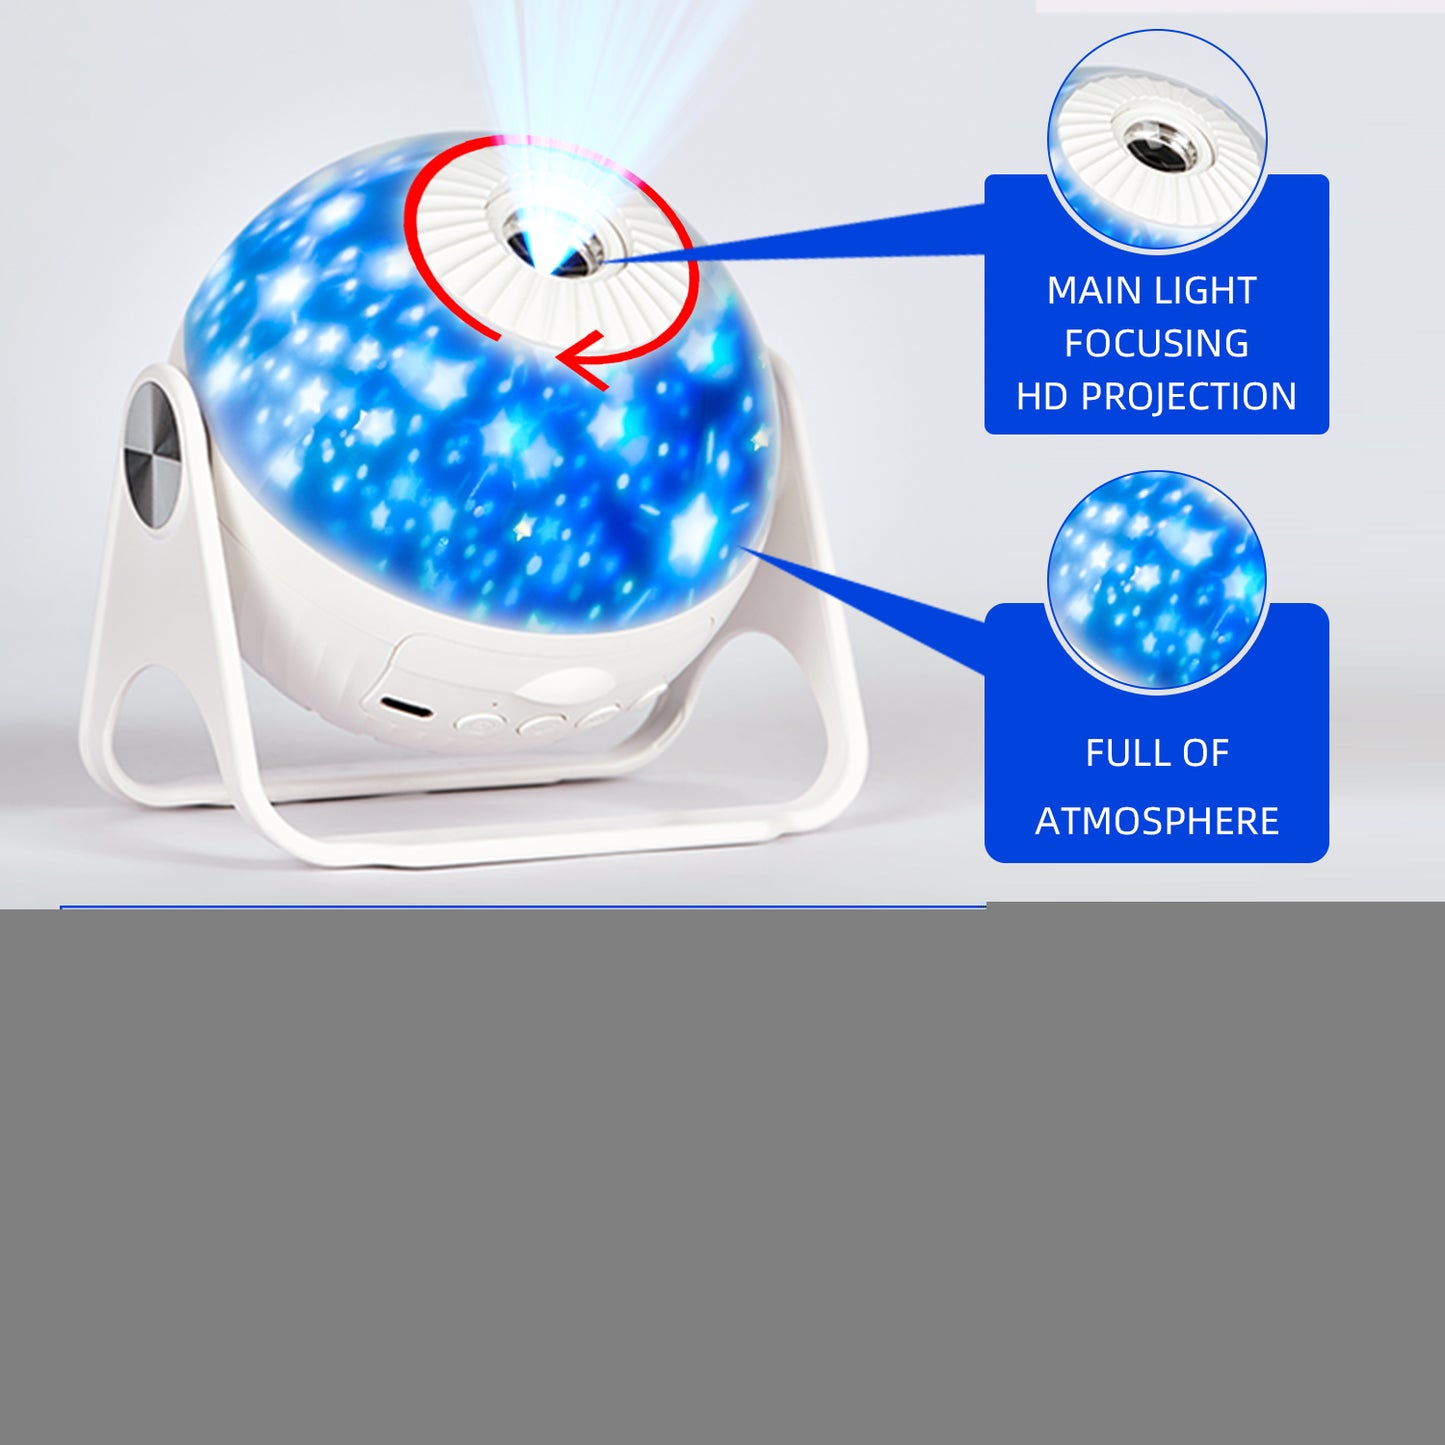 LED Star Projector Night Light 6 in 1 Planetarium Projection Galaxy